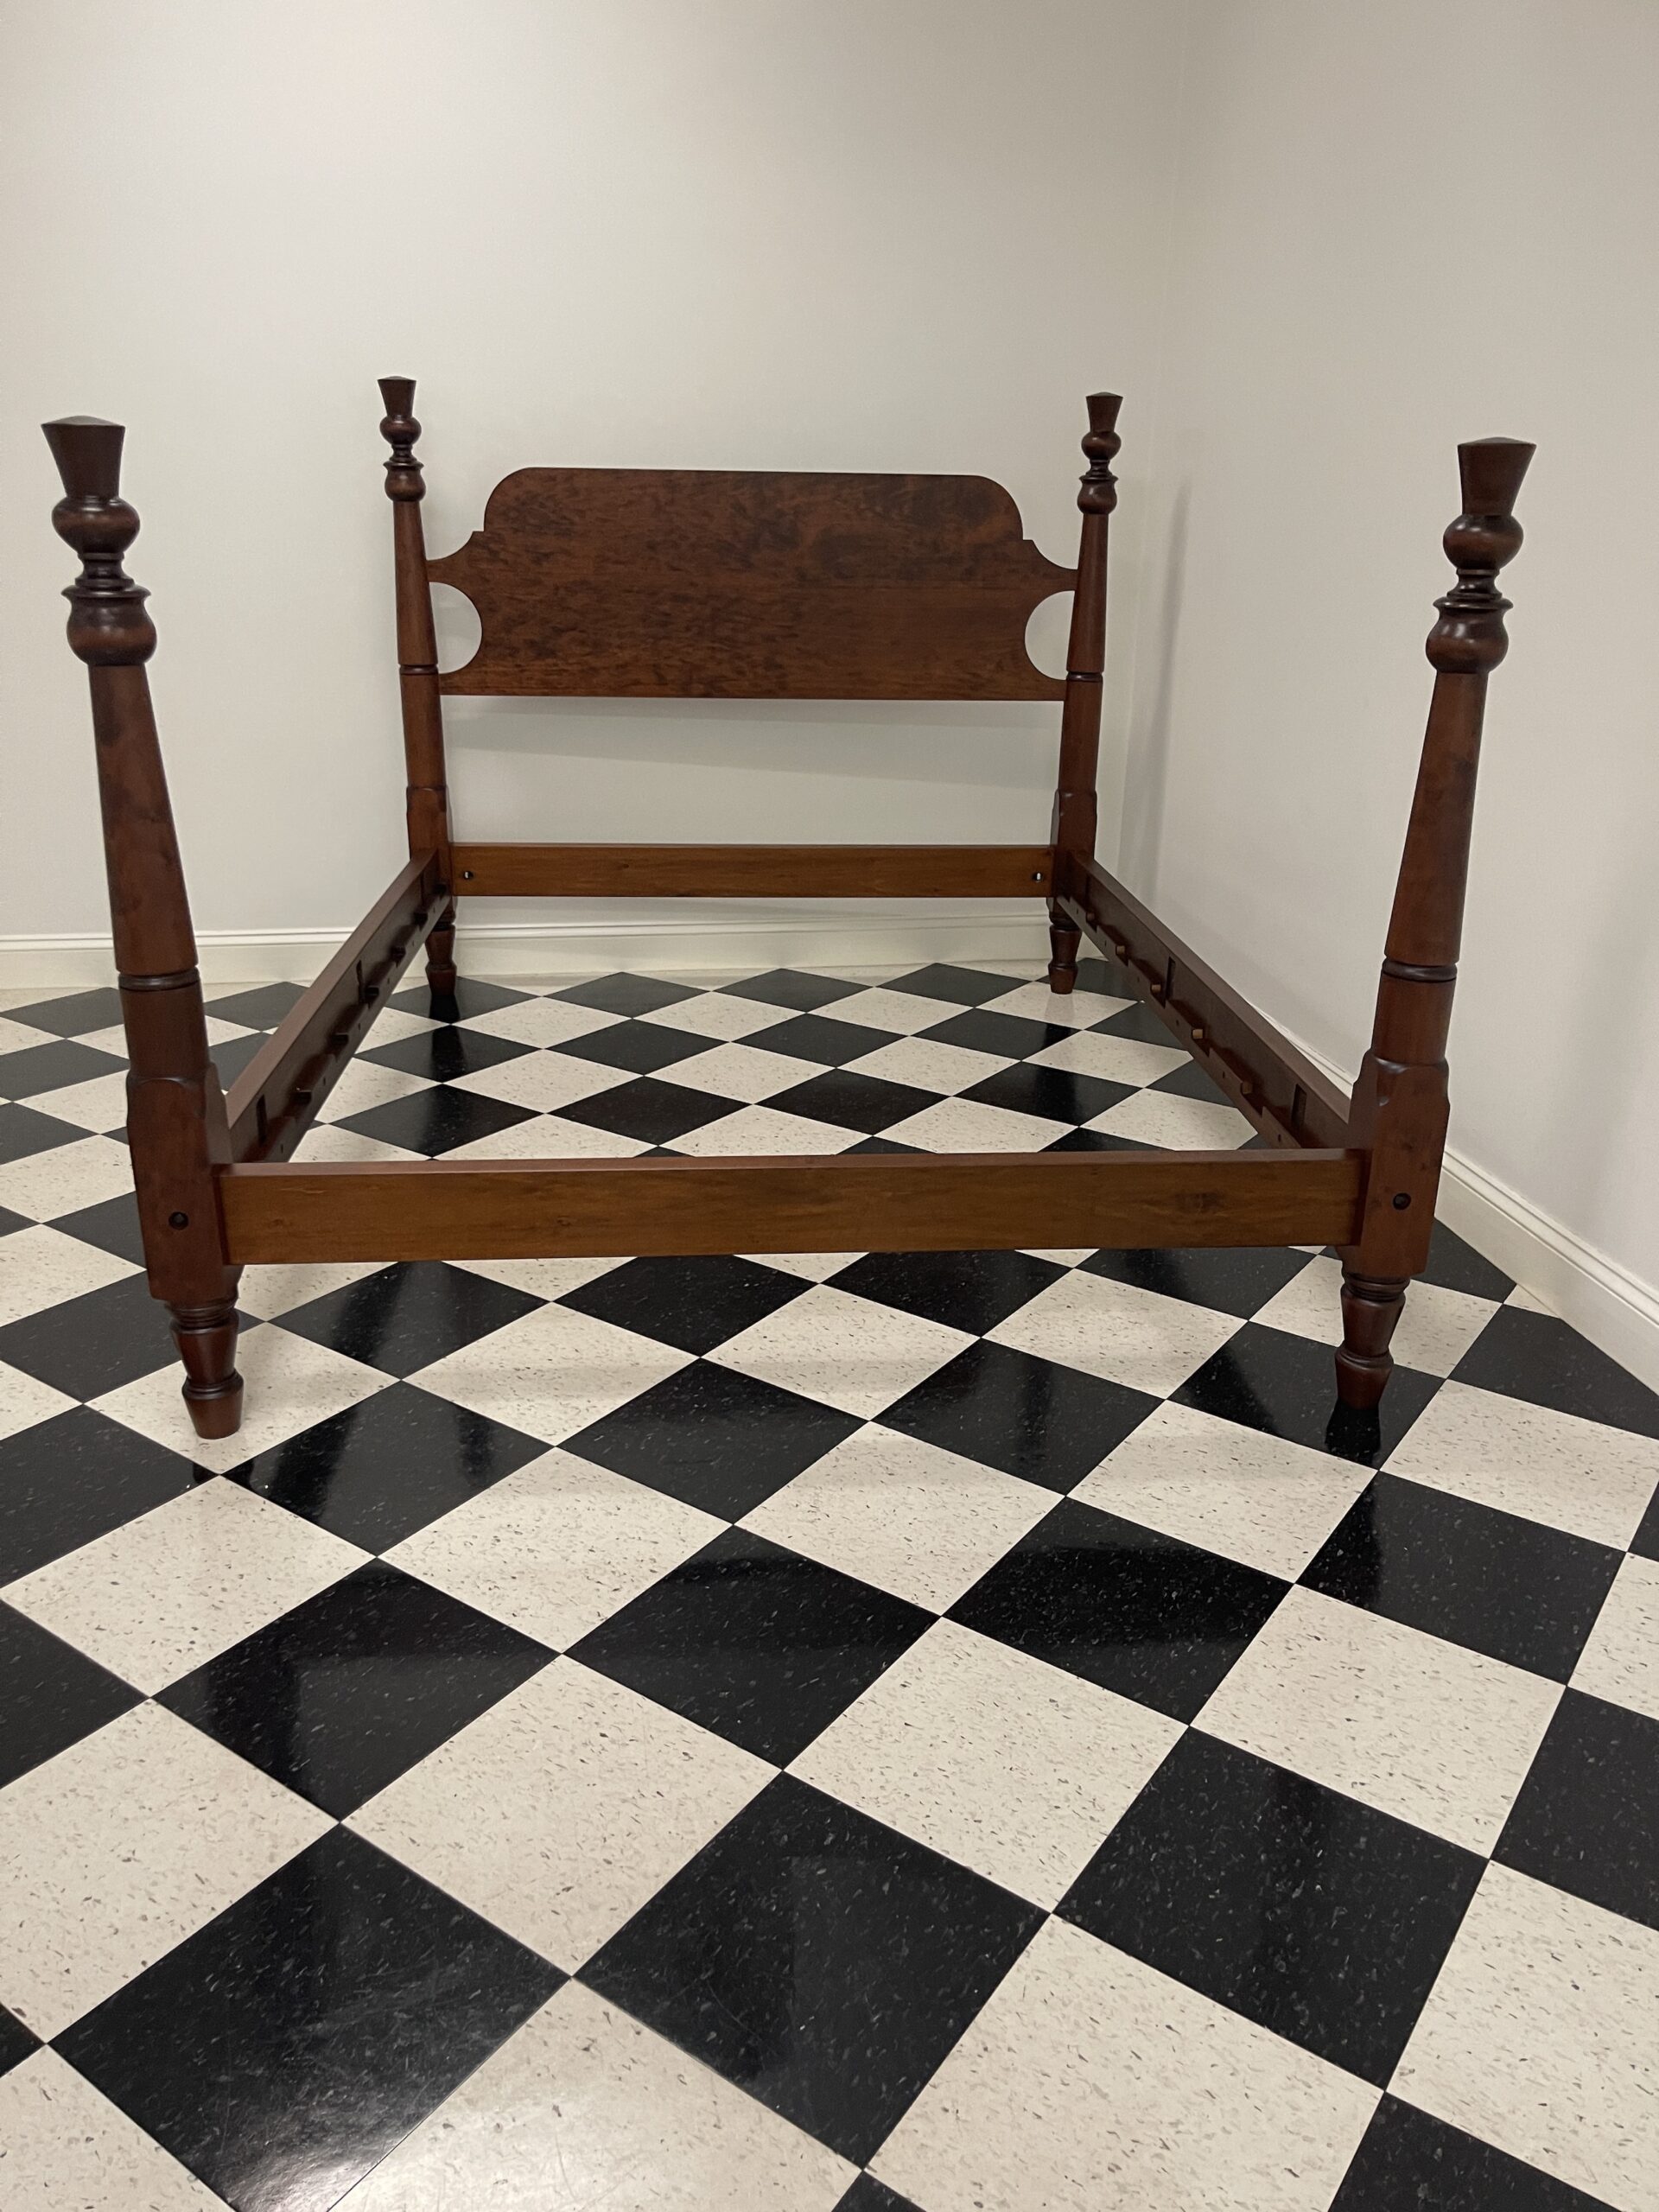 Queen Size Cherry Wood Bed Image